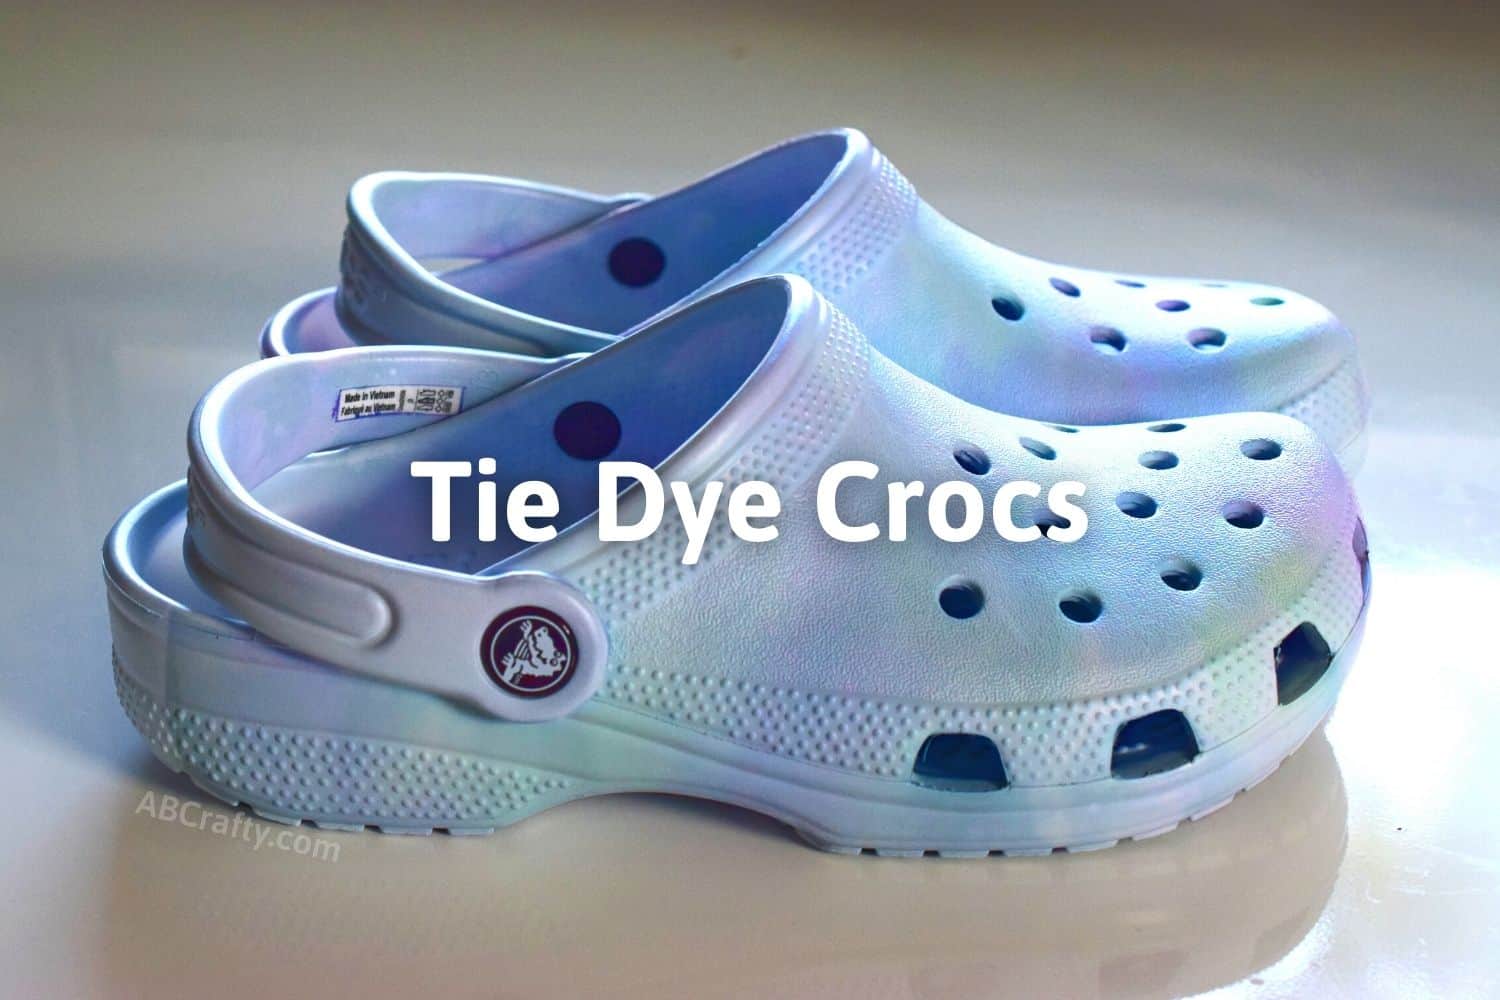 How to Clean Crocs, How to Wash your Crocs